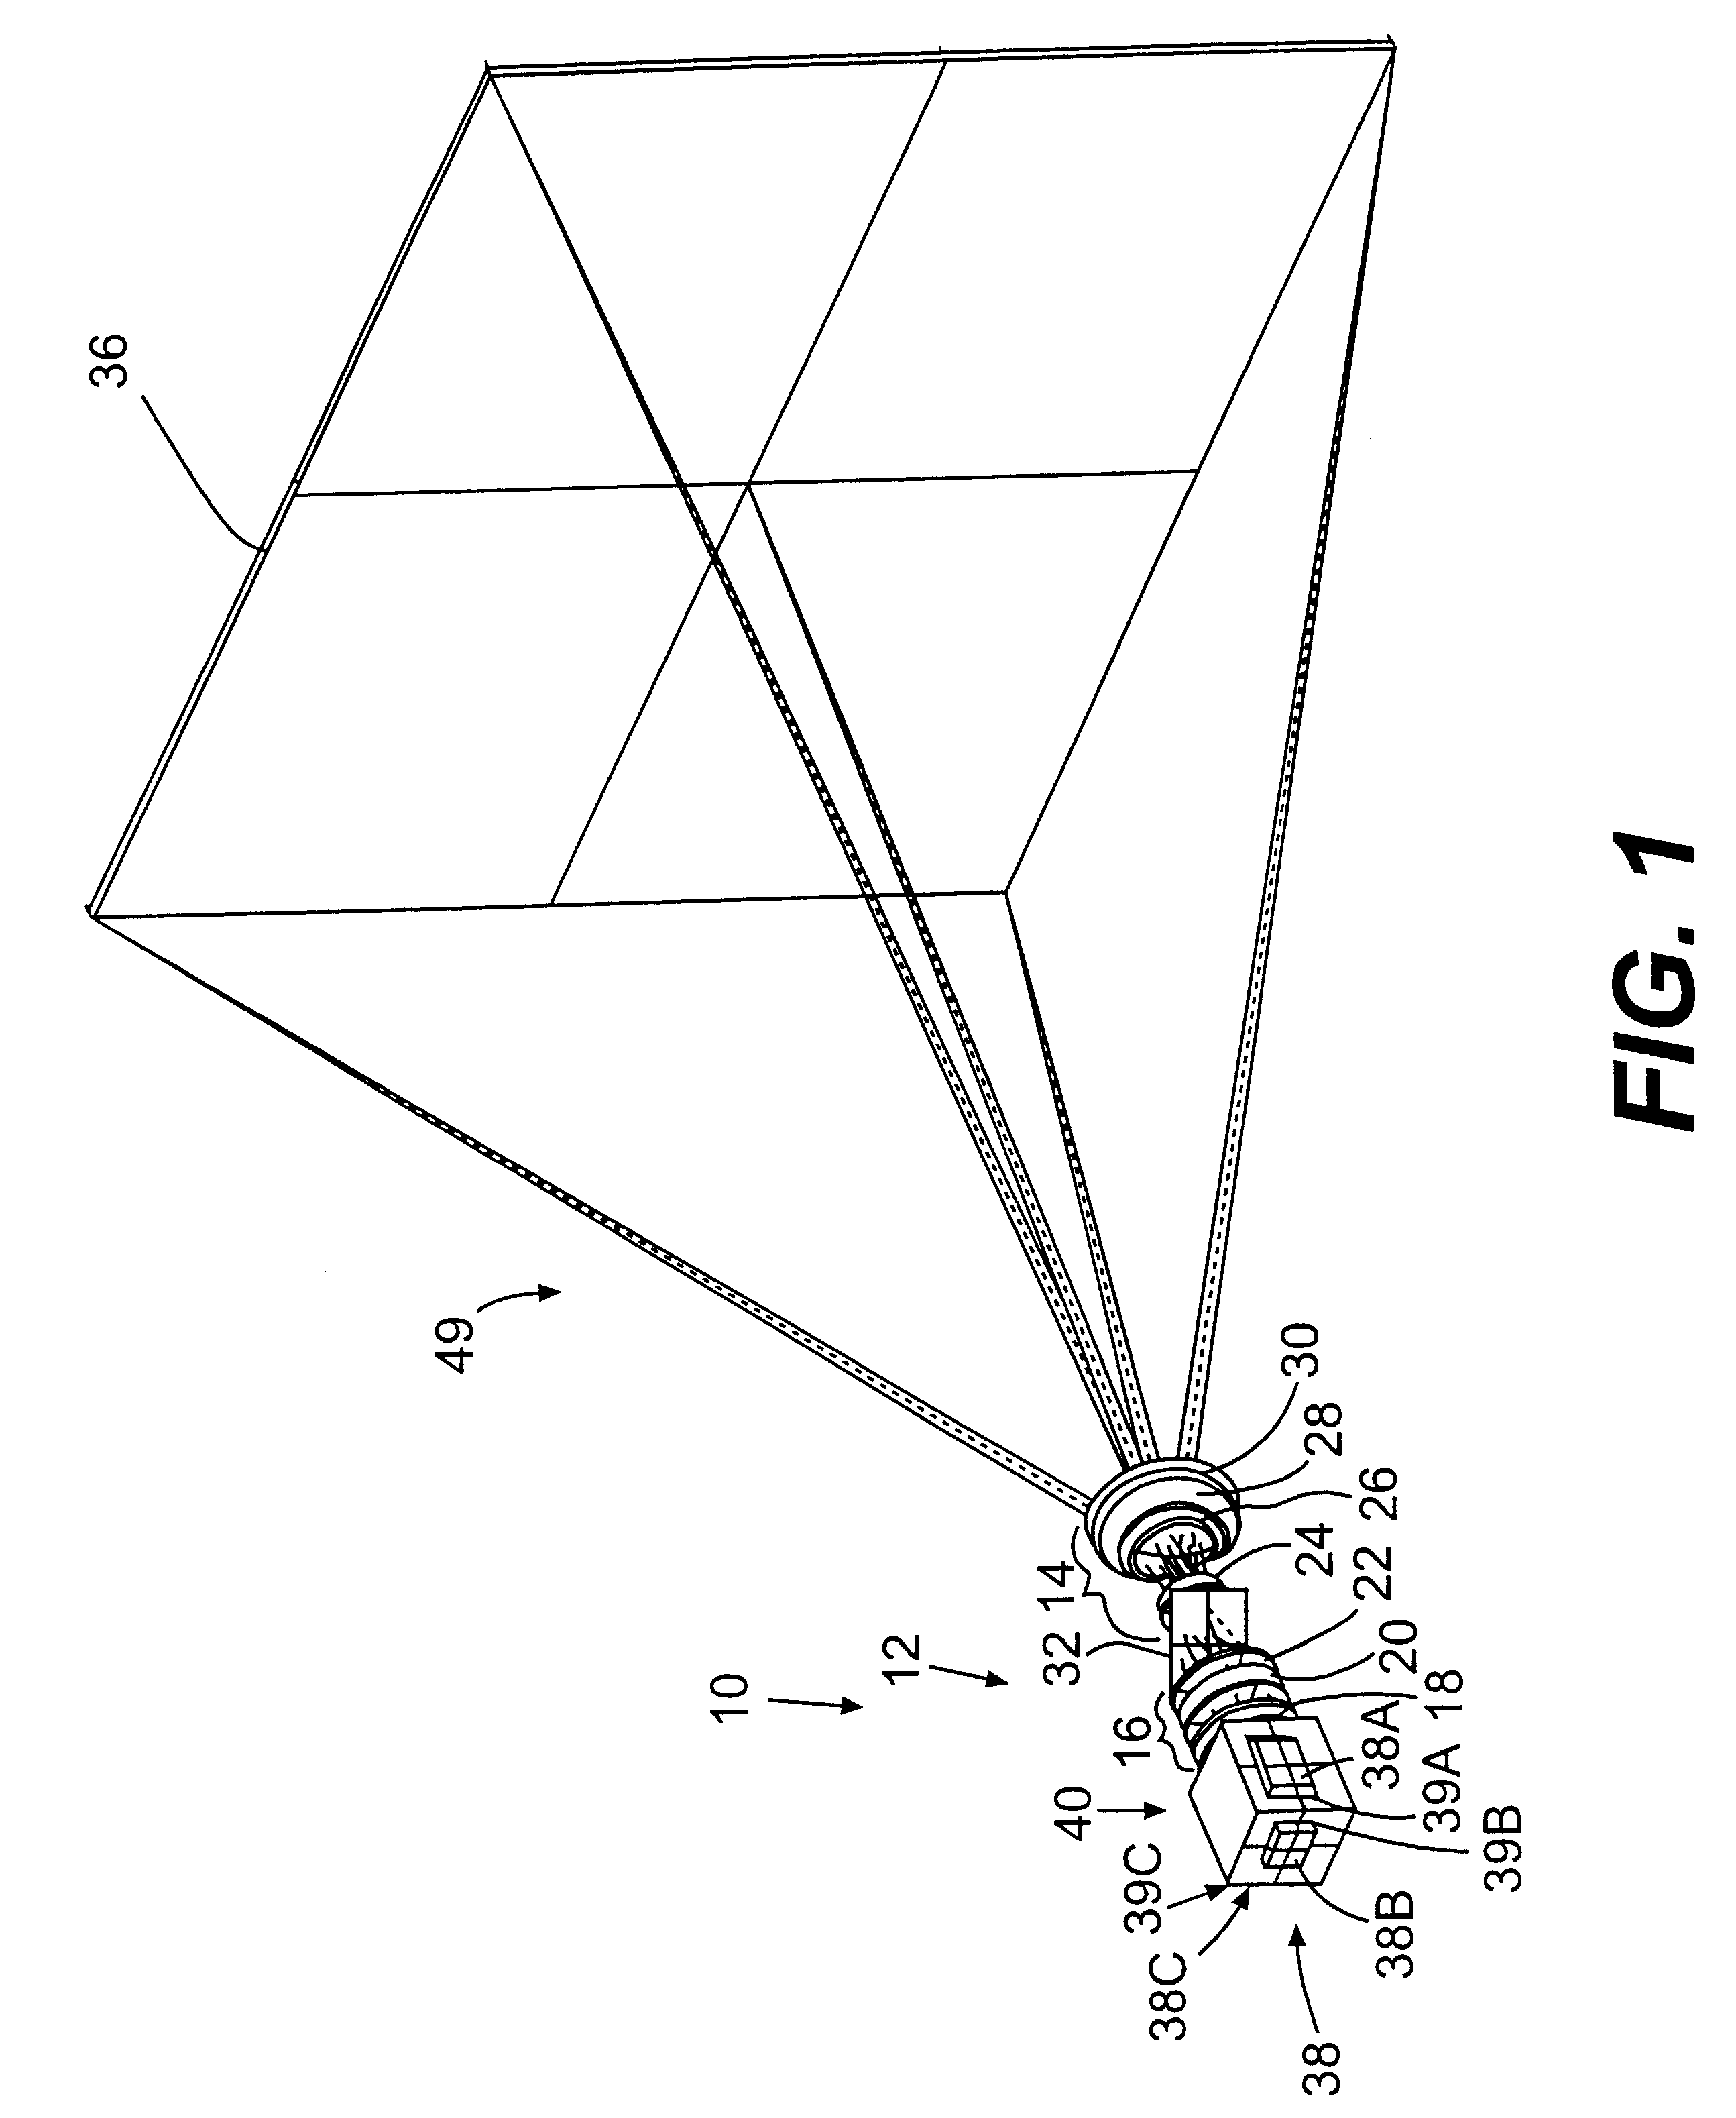 Projection lens and system including a reflecting linear polarizer